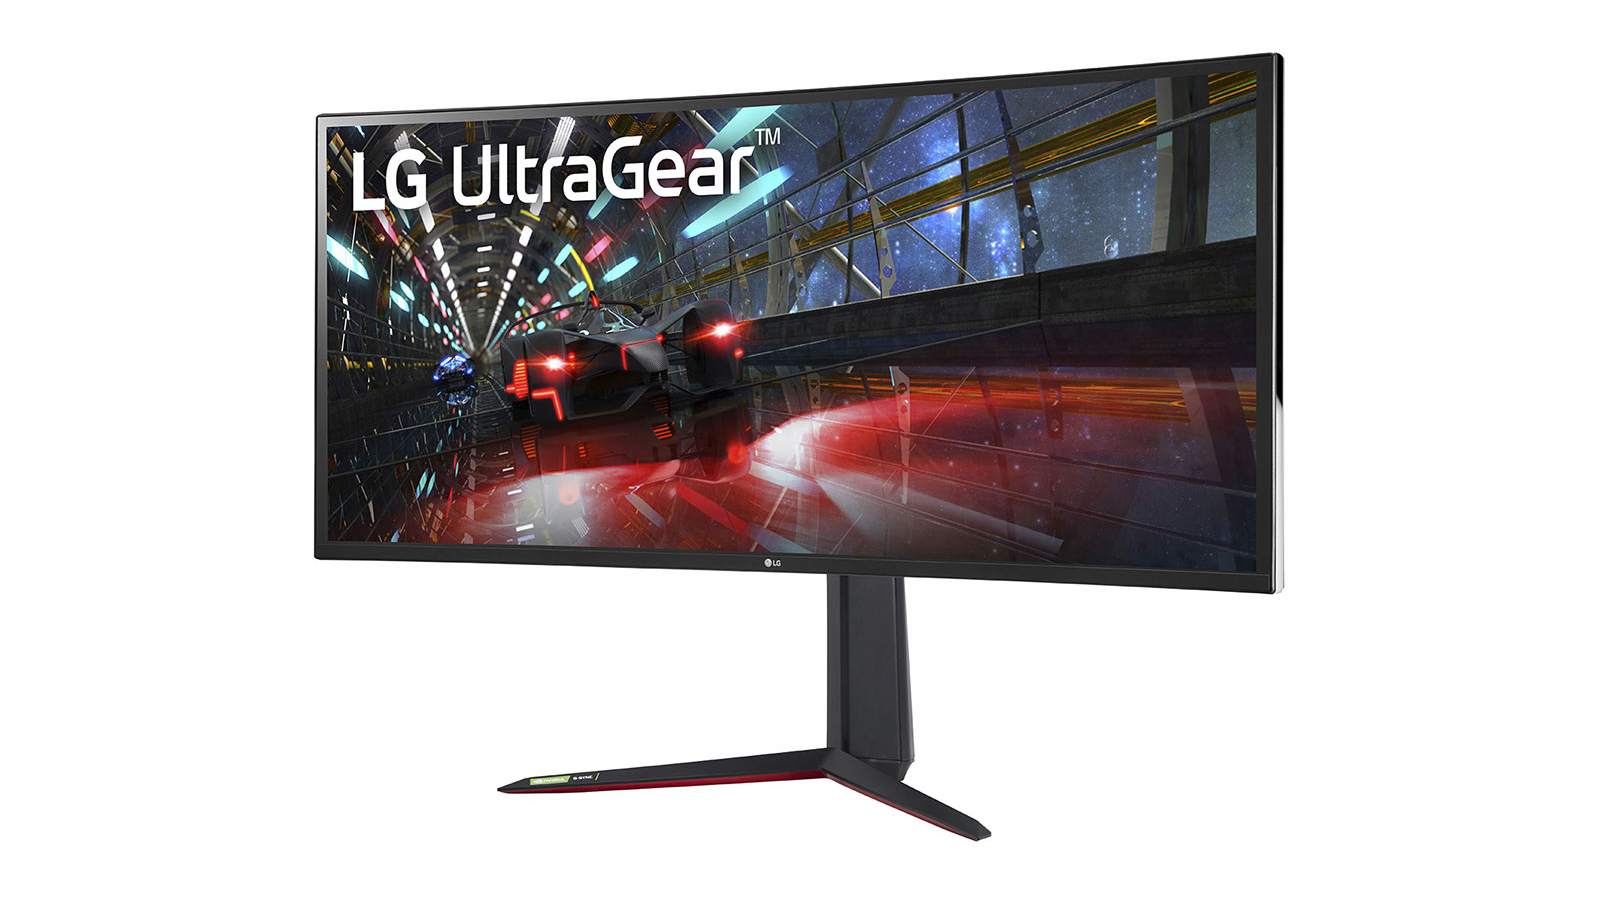 LG UltraGear 38GN950 at an angle on a white background